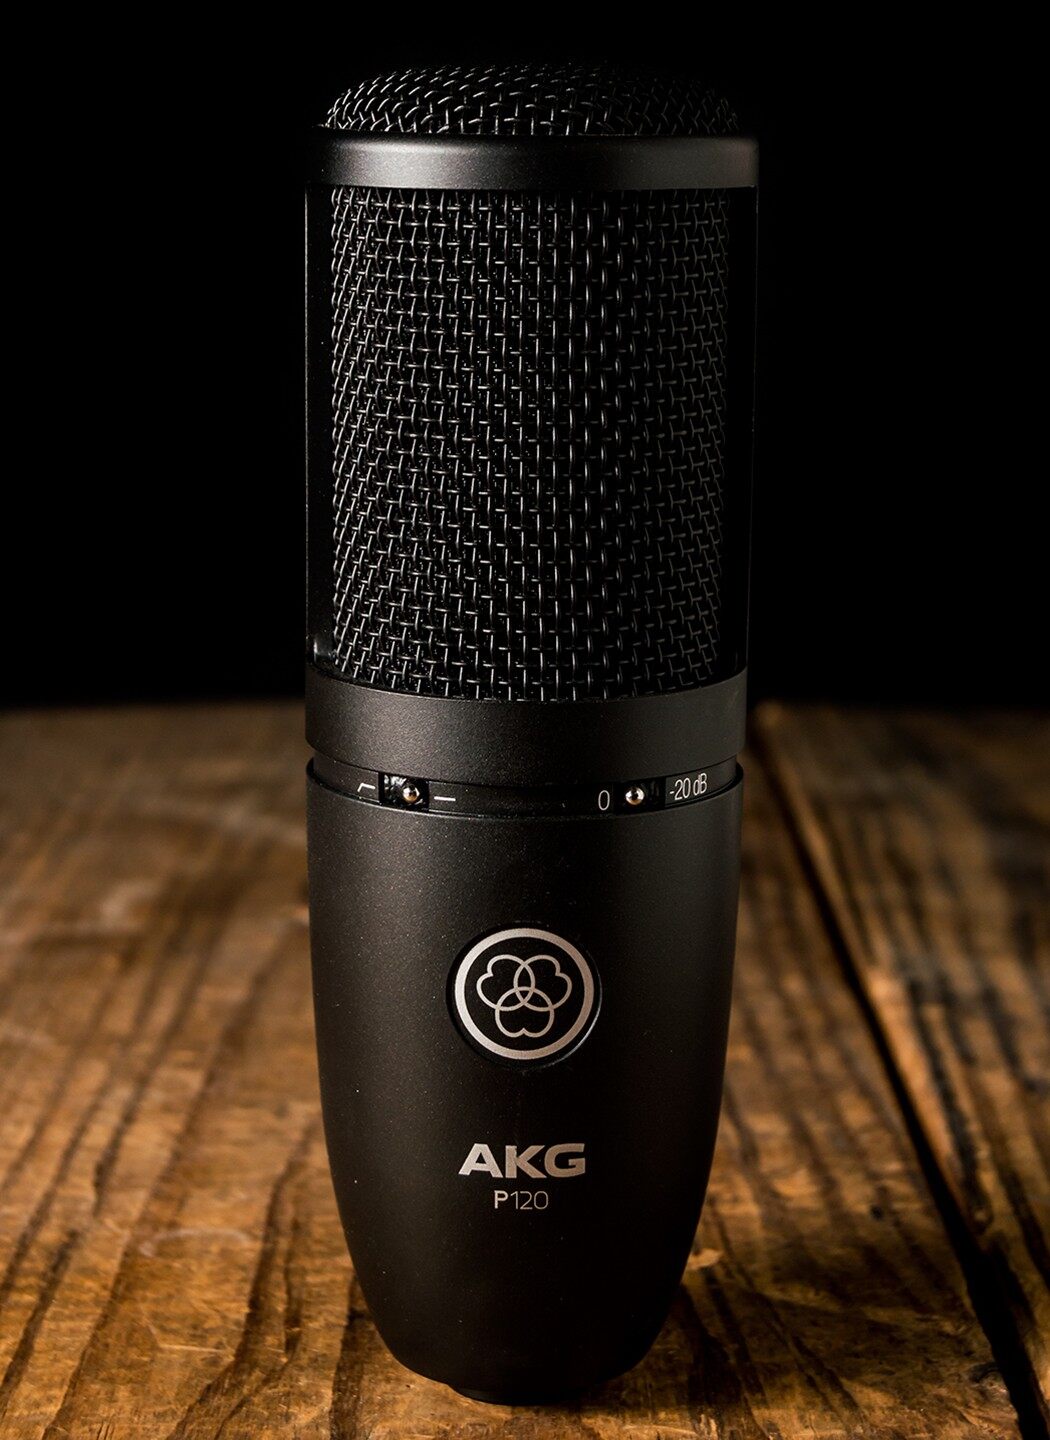 AKG P120: Entry-Level Condenser Microphone